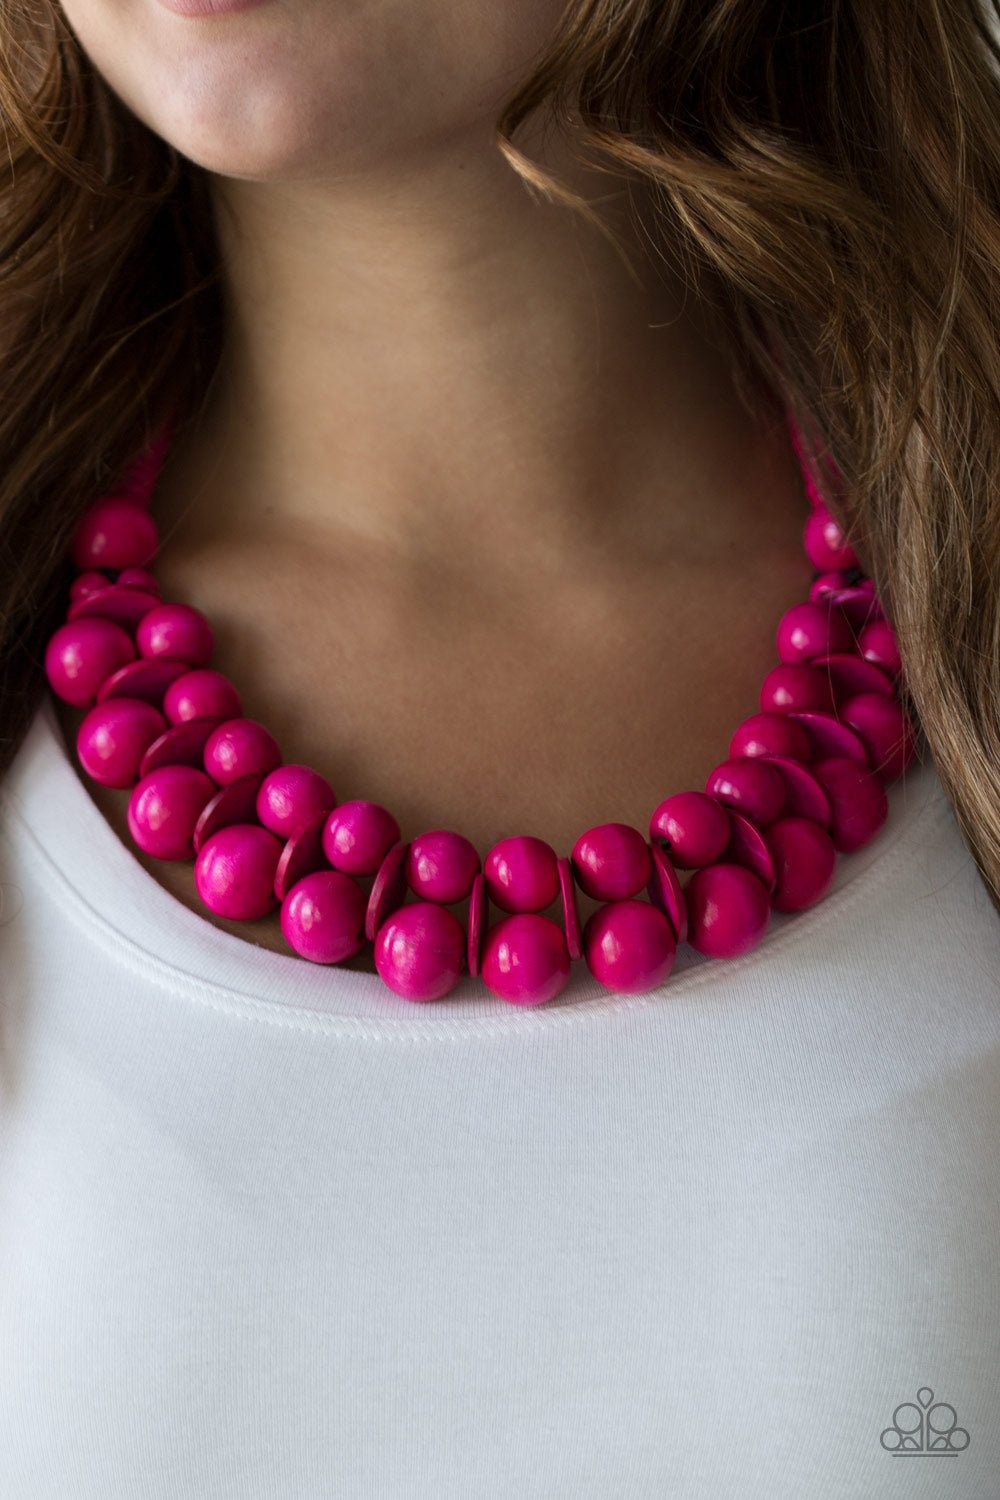 Paparazzi Accessories Caribbean Cover Girl - Pink Necklace & Earrings 